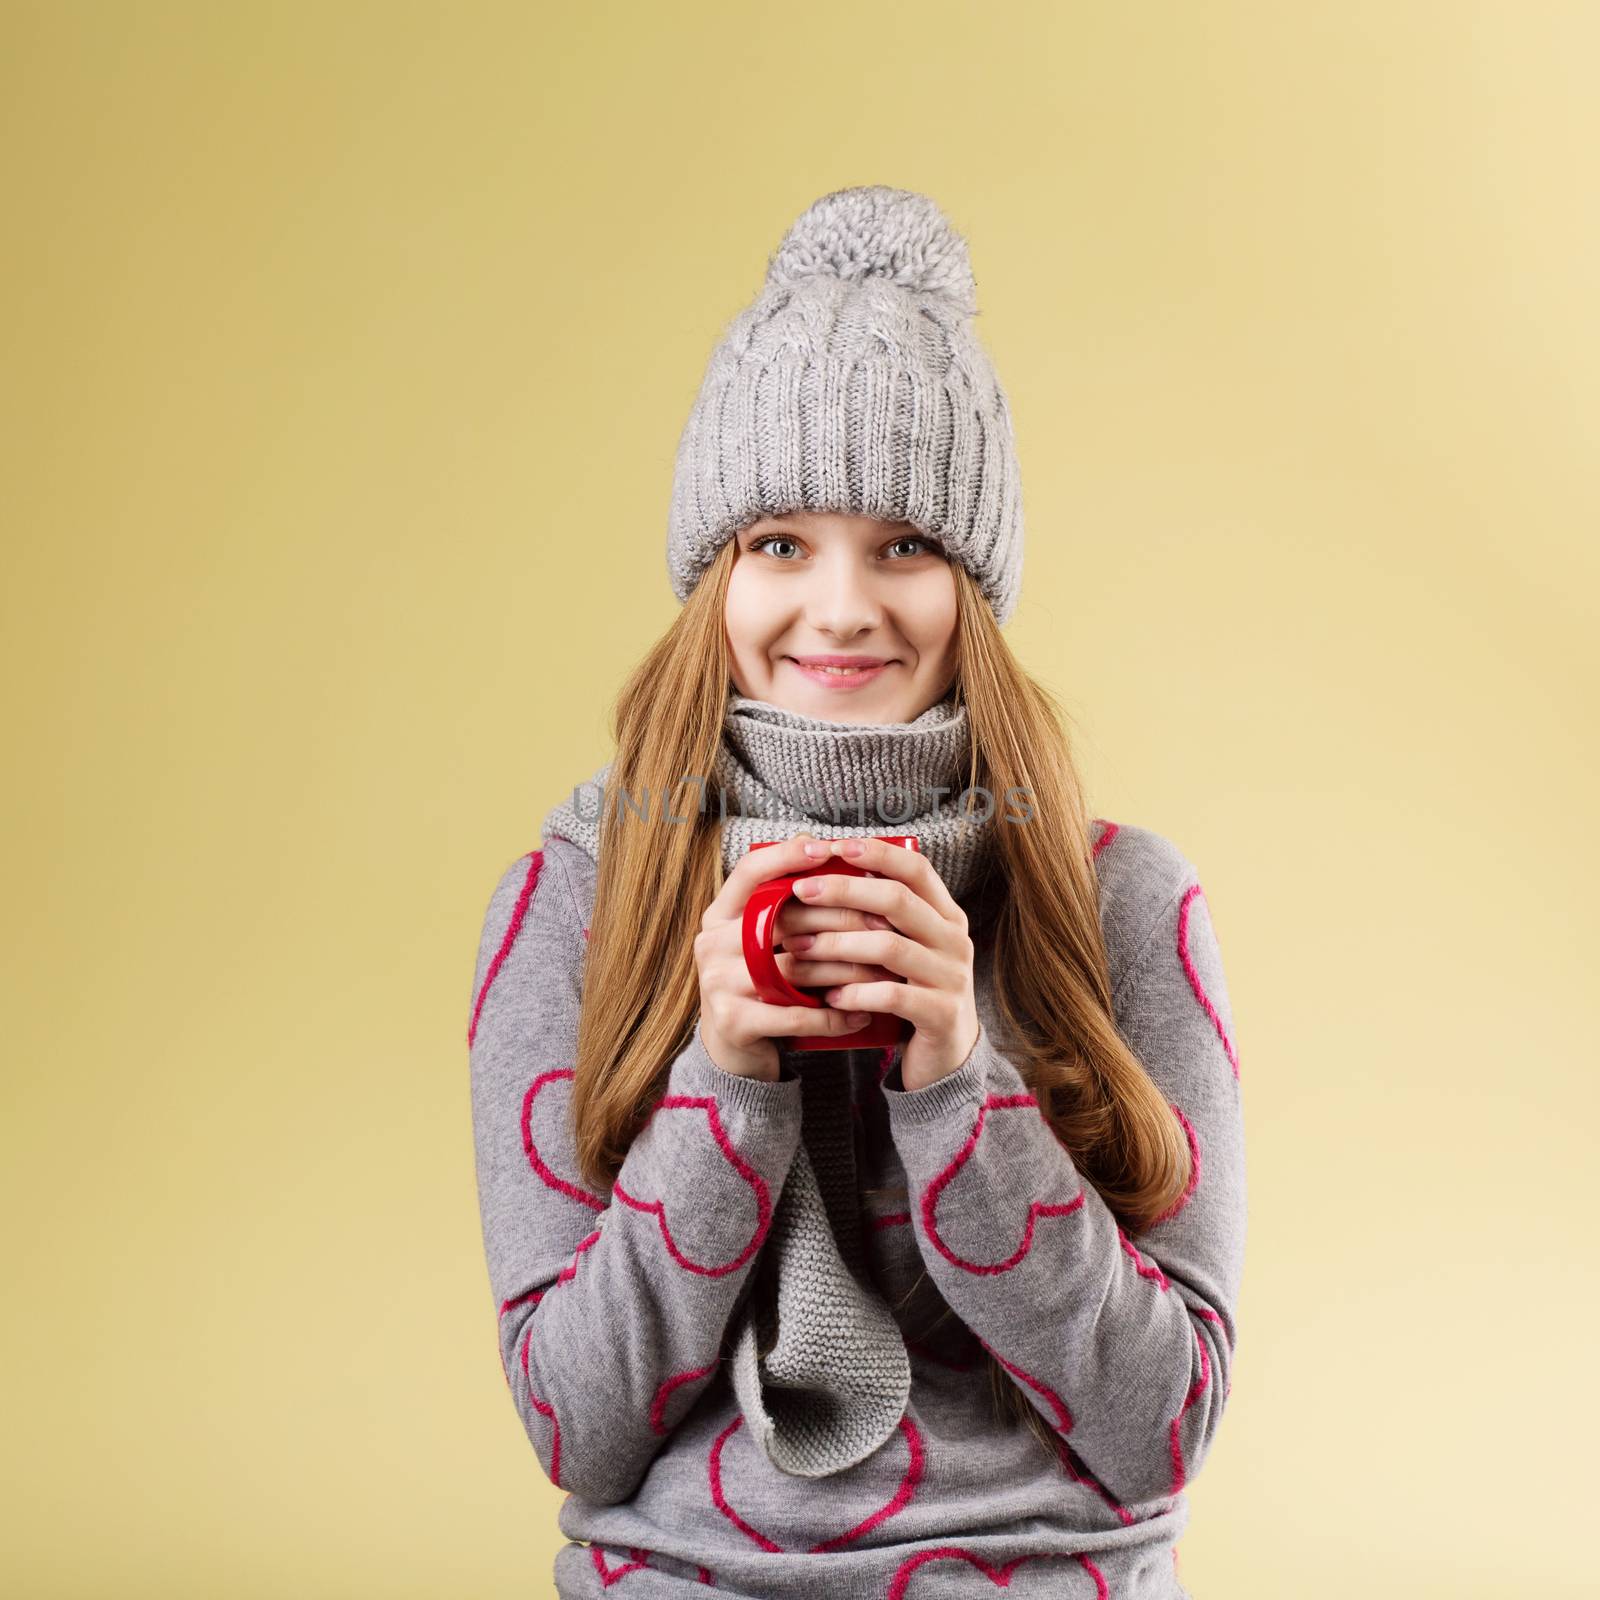 girl wearing gray woolen cap and scarf holding a red cup against by natazhekova